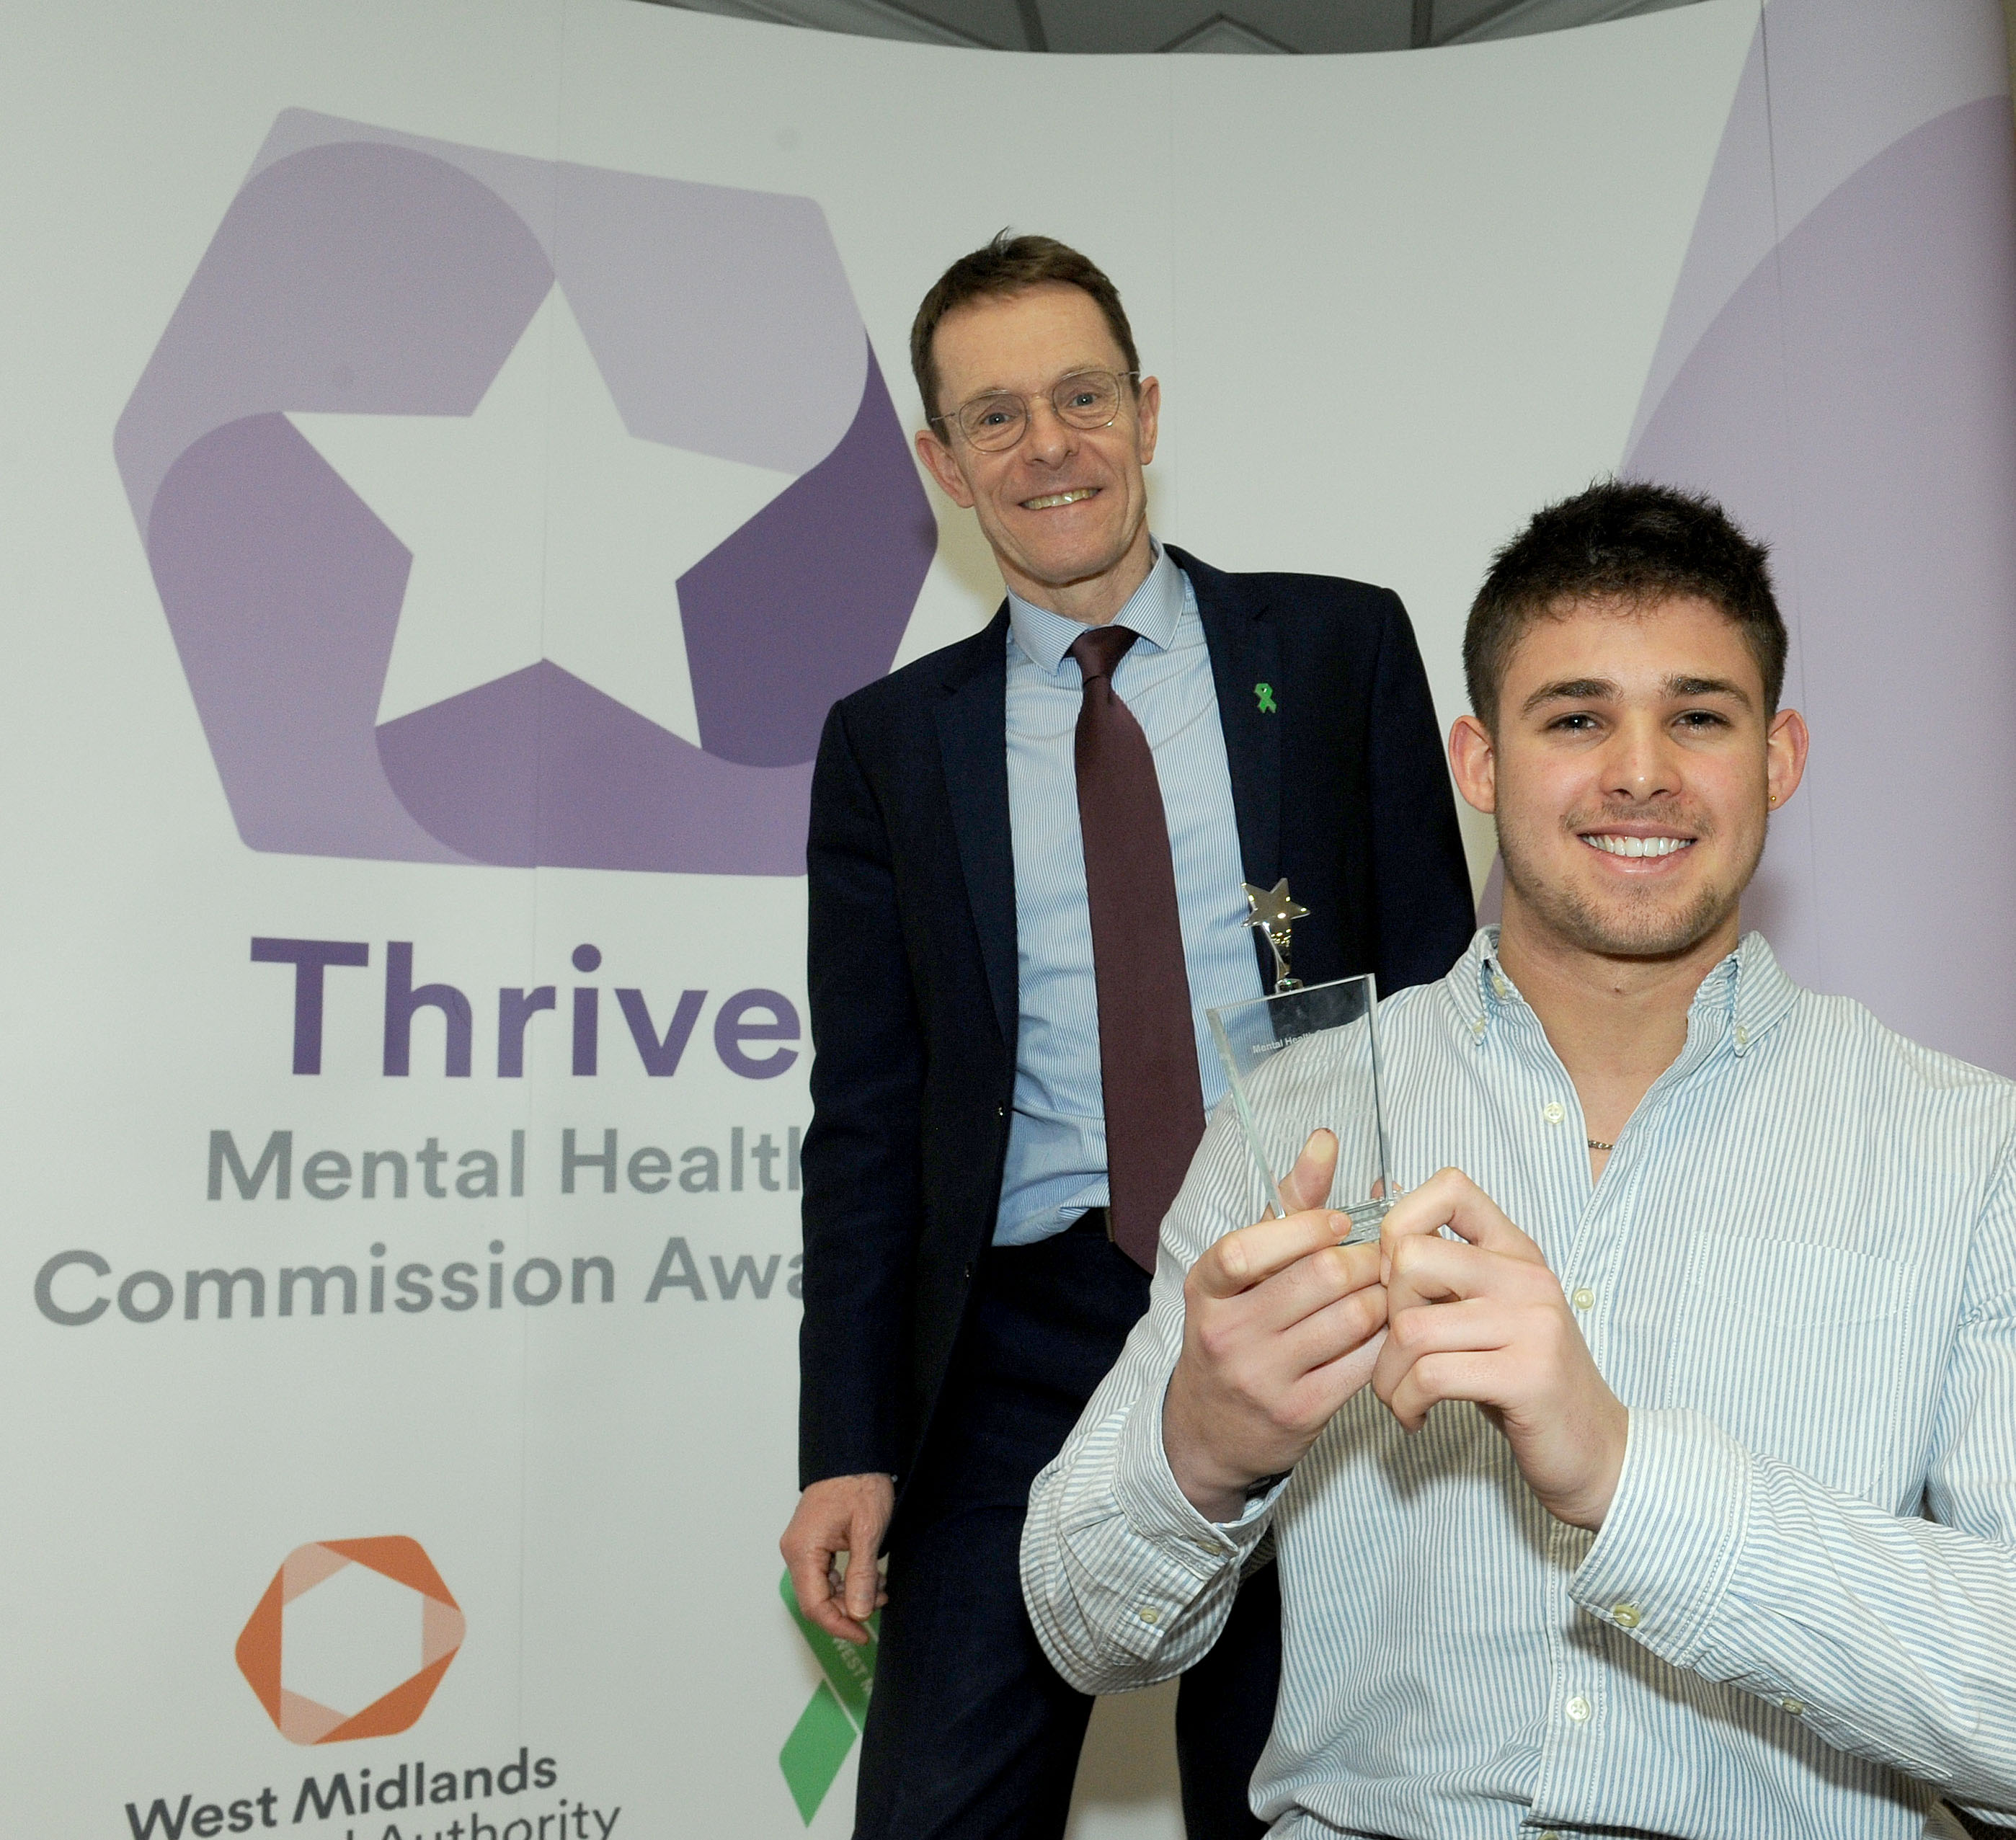 Caleb Turner receives his trophy from Mayor of the West Midlands Andy Street after being named Mental Health Superstar at the Thrive Mental Health Commission Awards 2019.